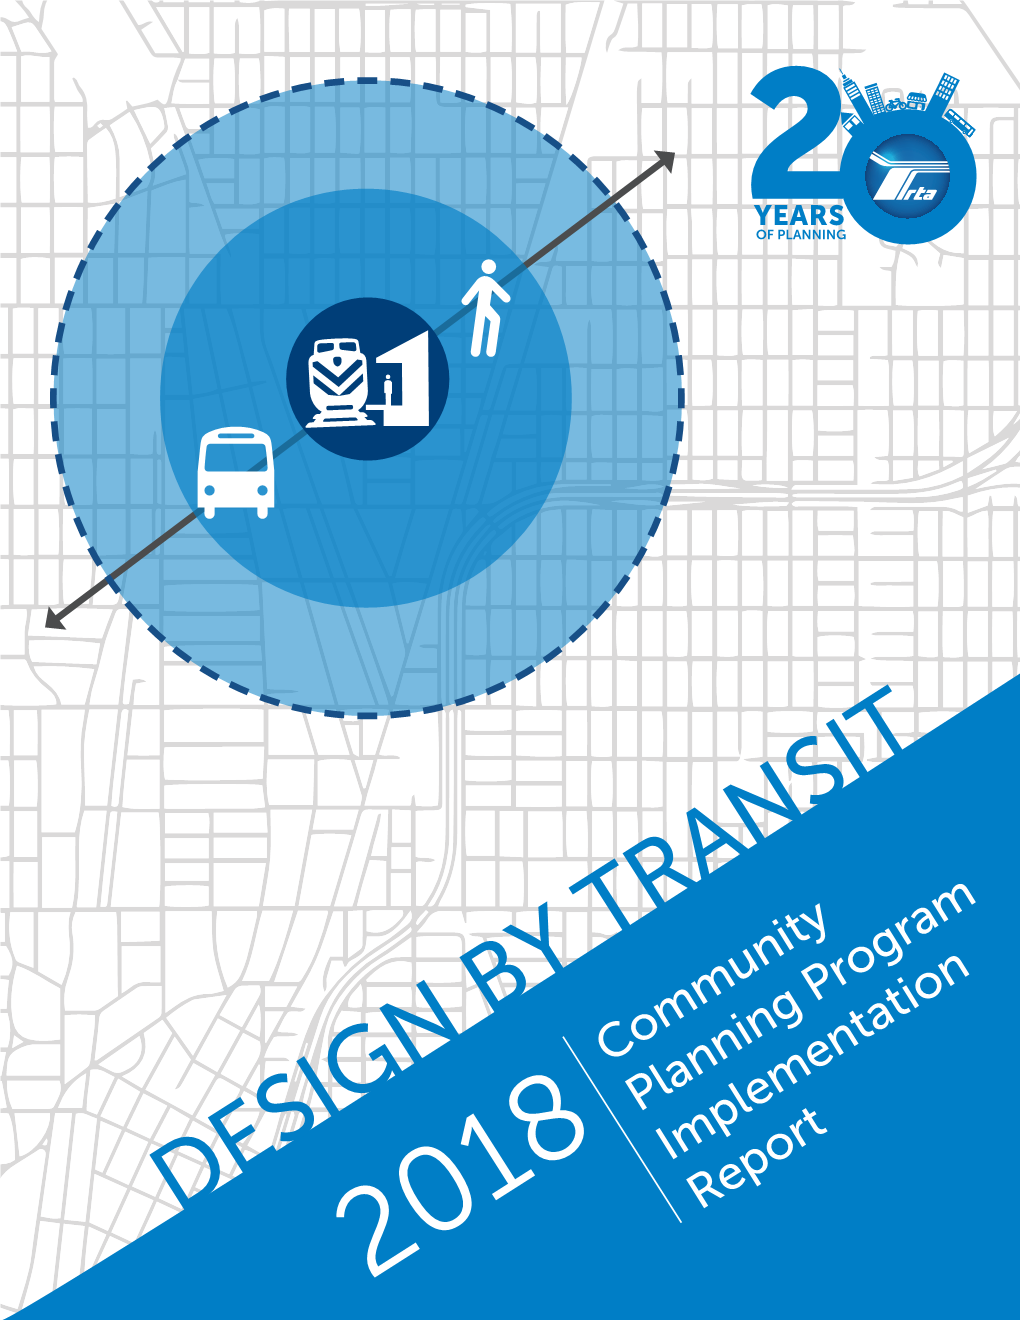 DESIGN by Transitreport 2018 2018 COMMUNITY PLANNING PROGRAM IMPLEMENTATION REPORT WE ARE the RTA